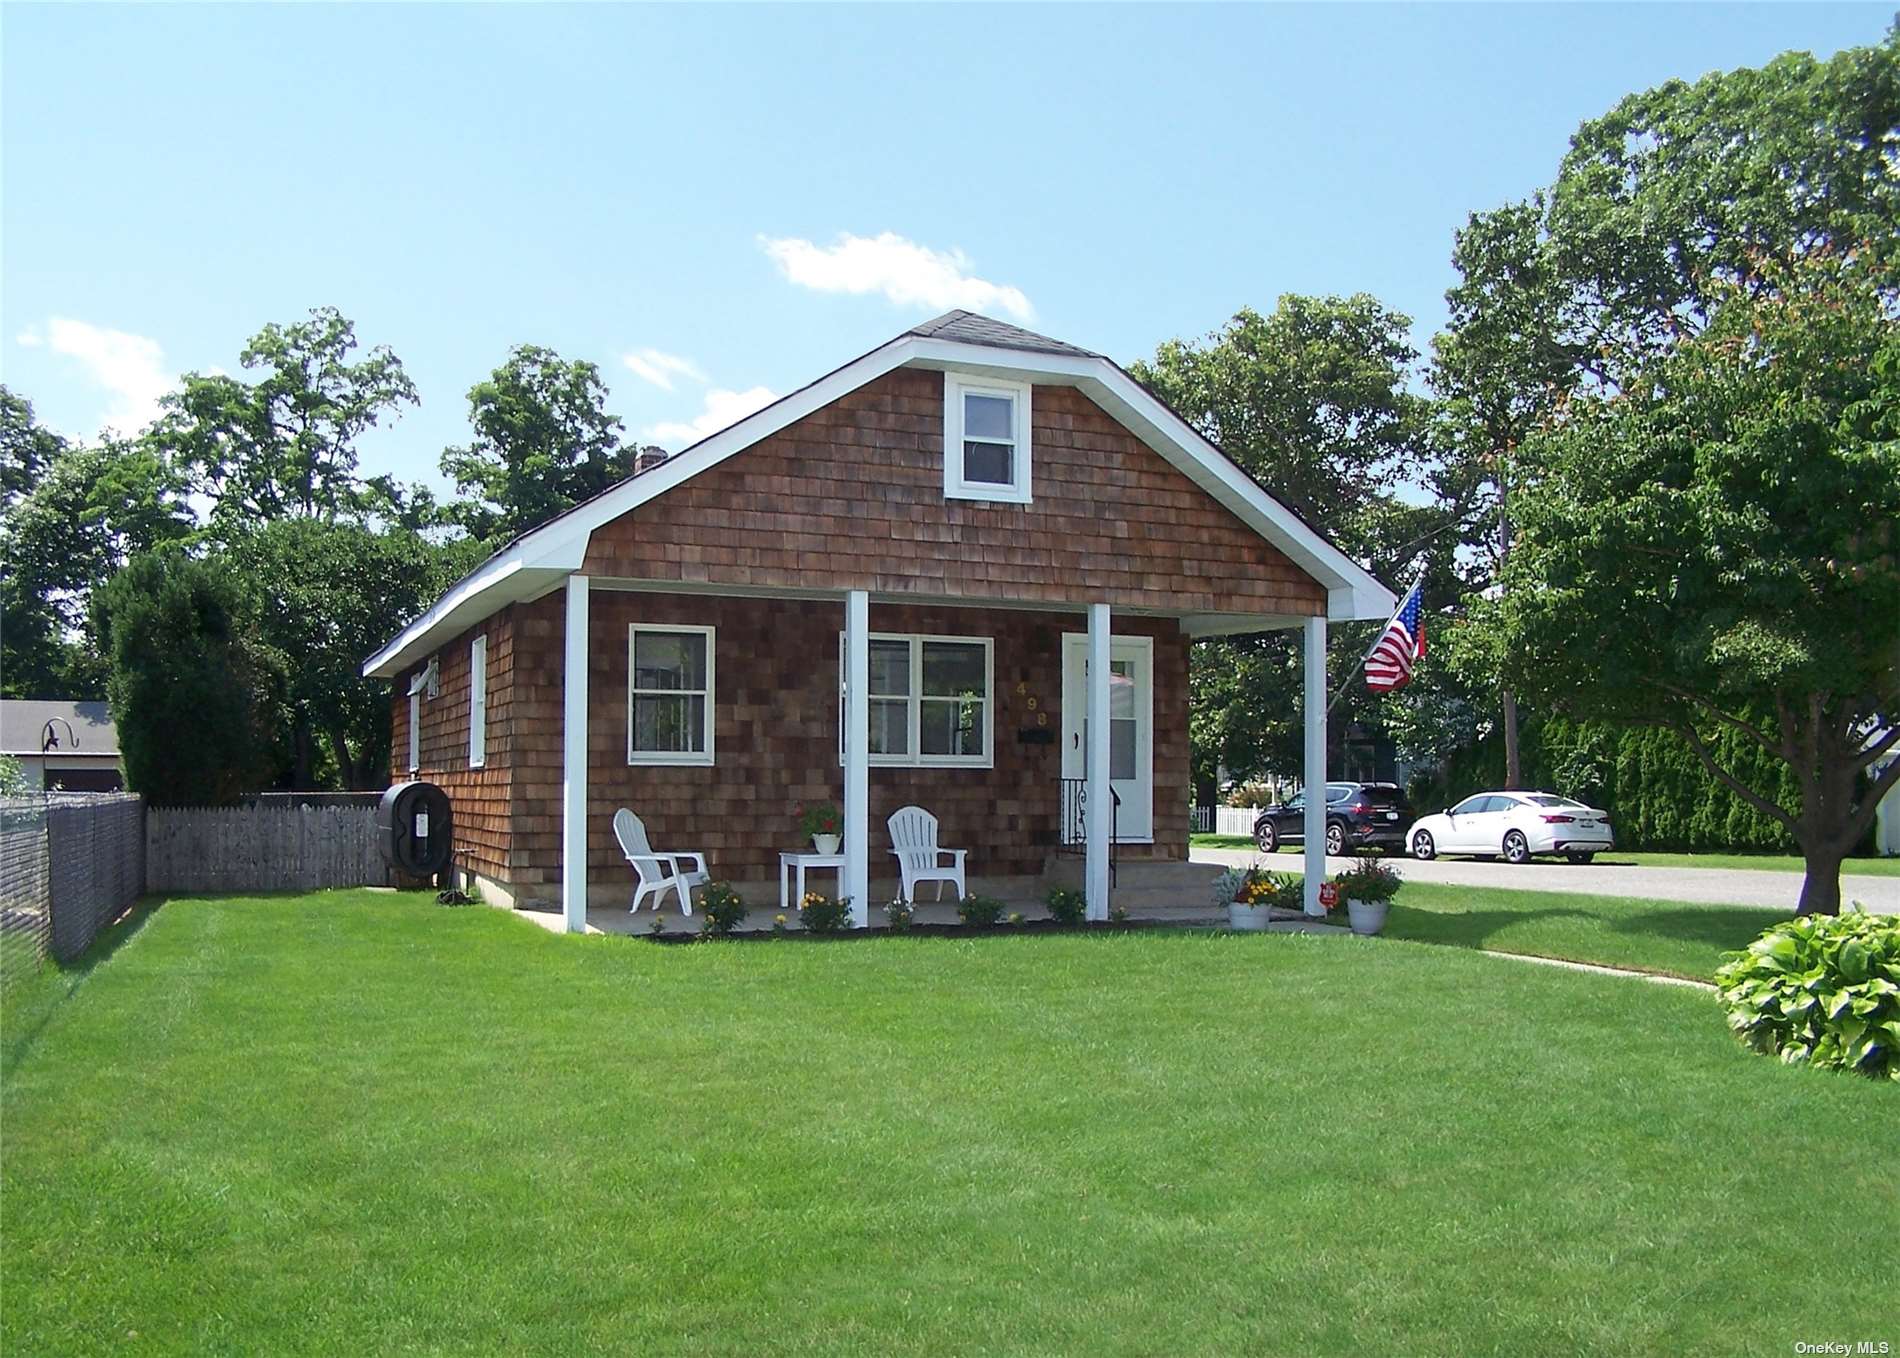 a front view of house with yard and patio